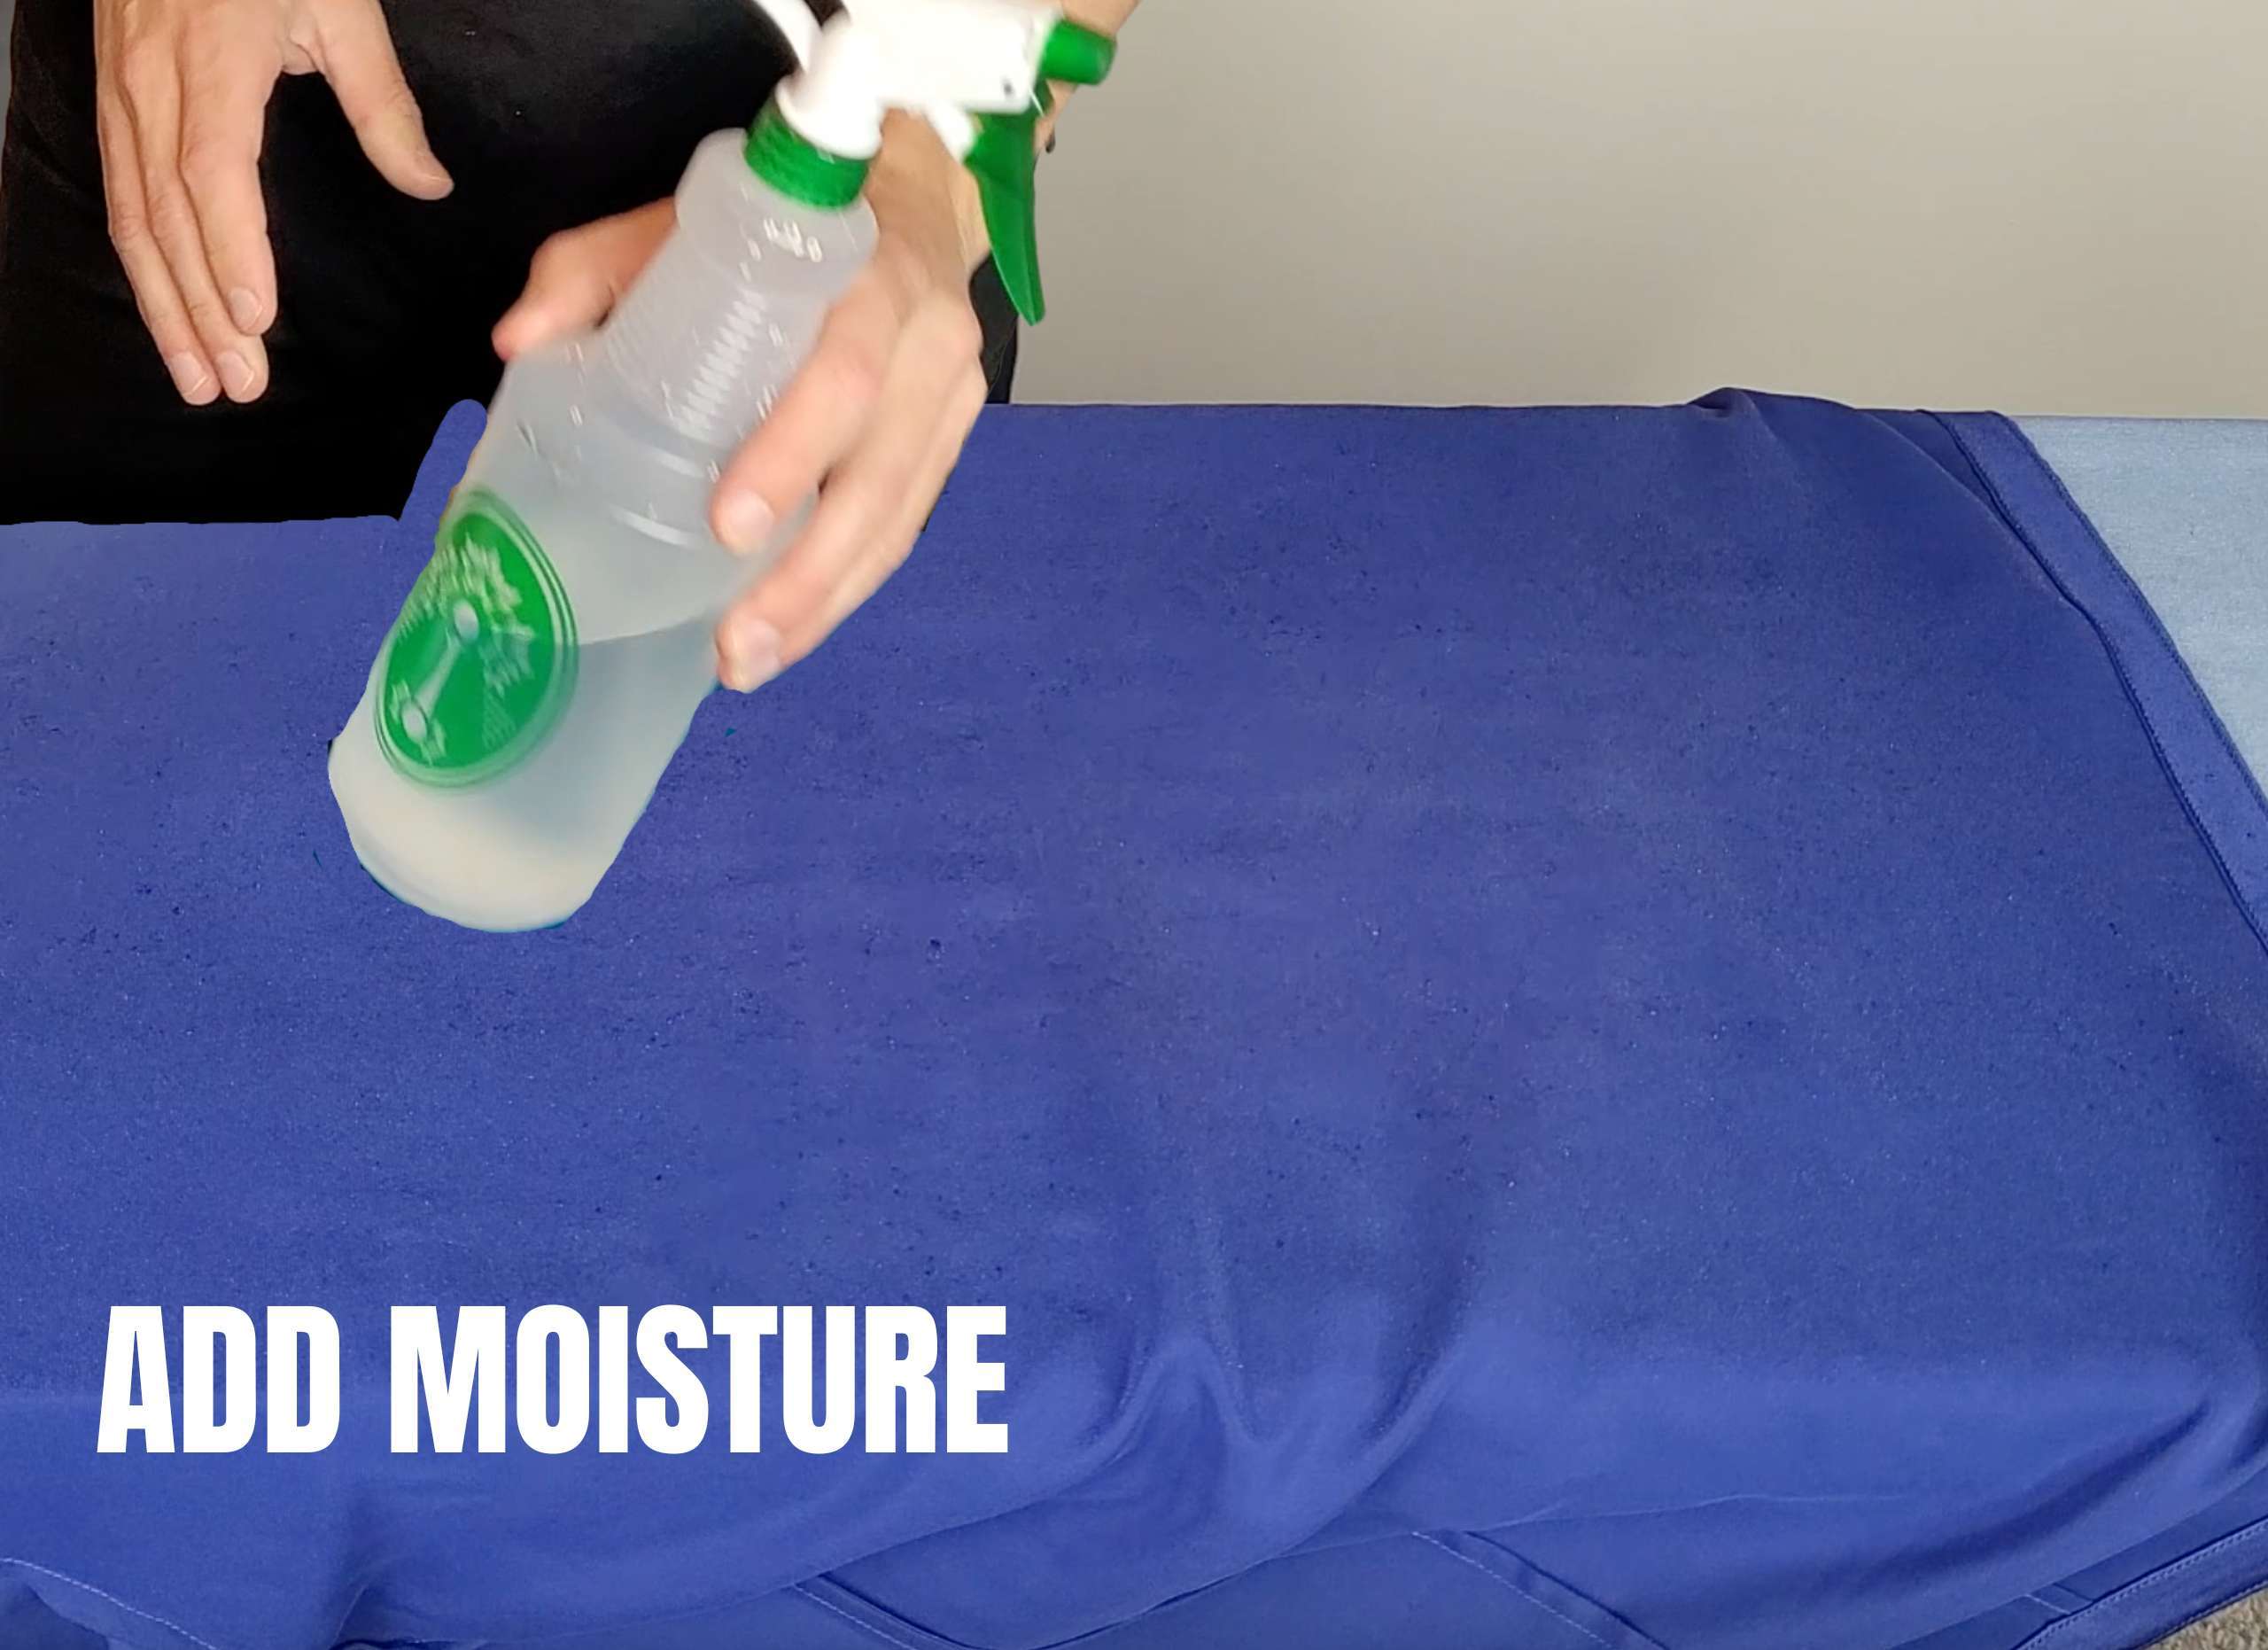 photo of a man holding a spray bottle and applying moisture to a silk pajama set